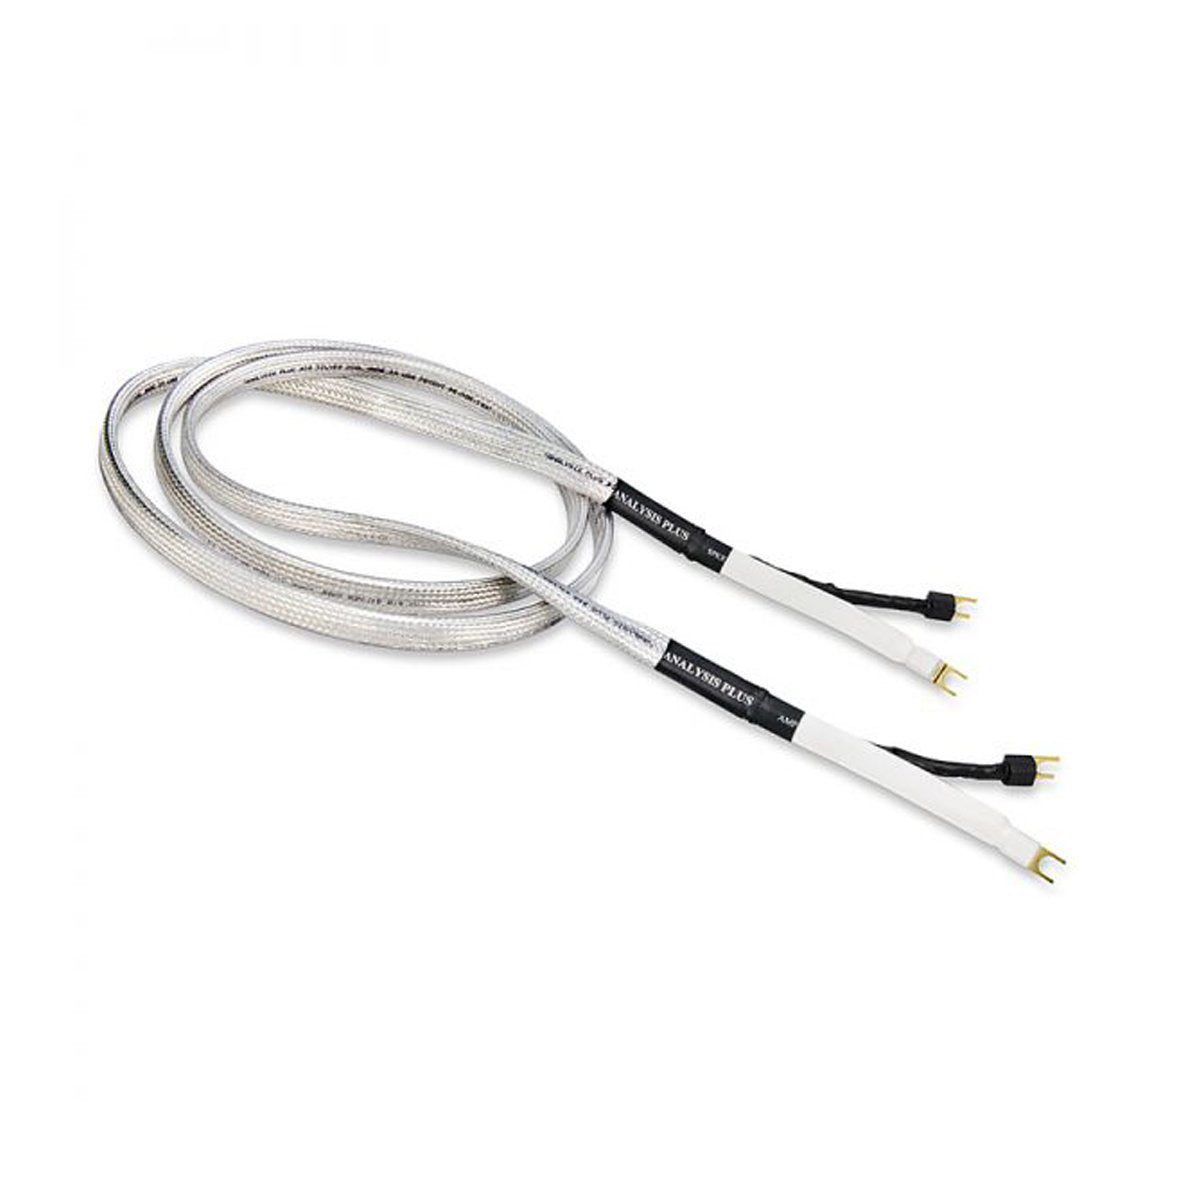 Analysis Plus Big Silver Oval Speaker Cable - The Audio Experts